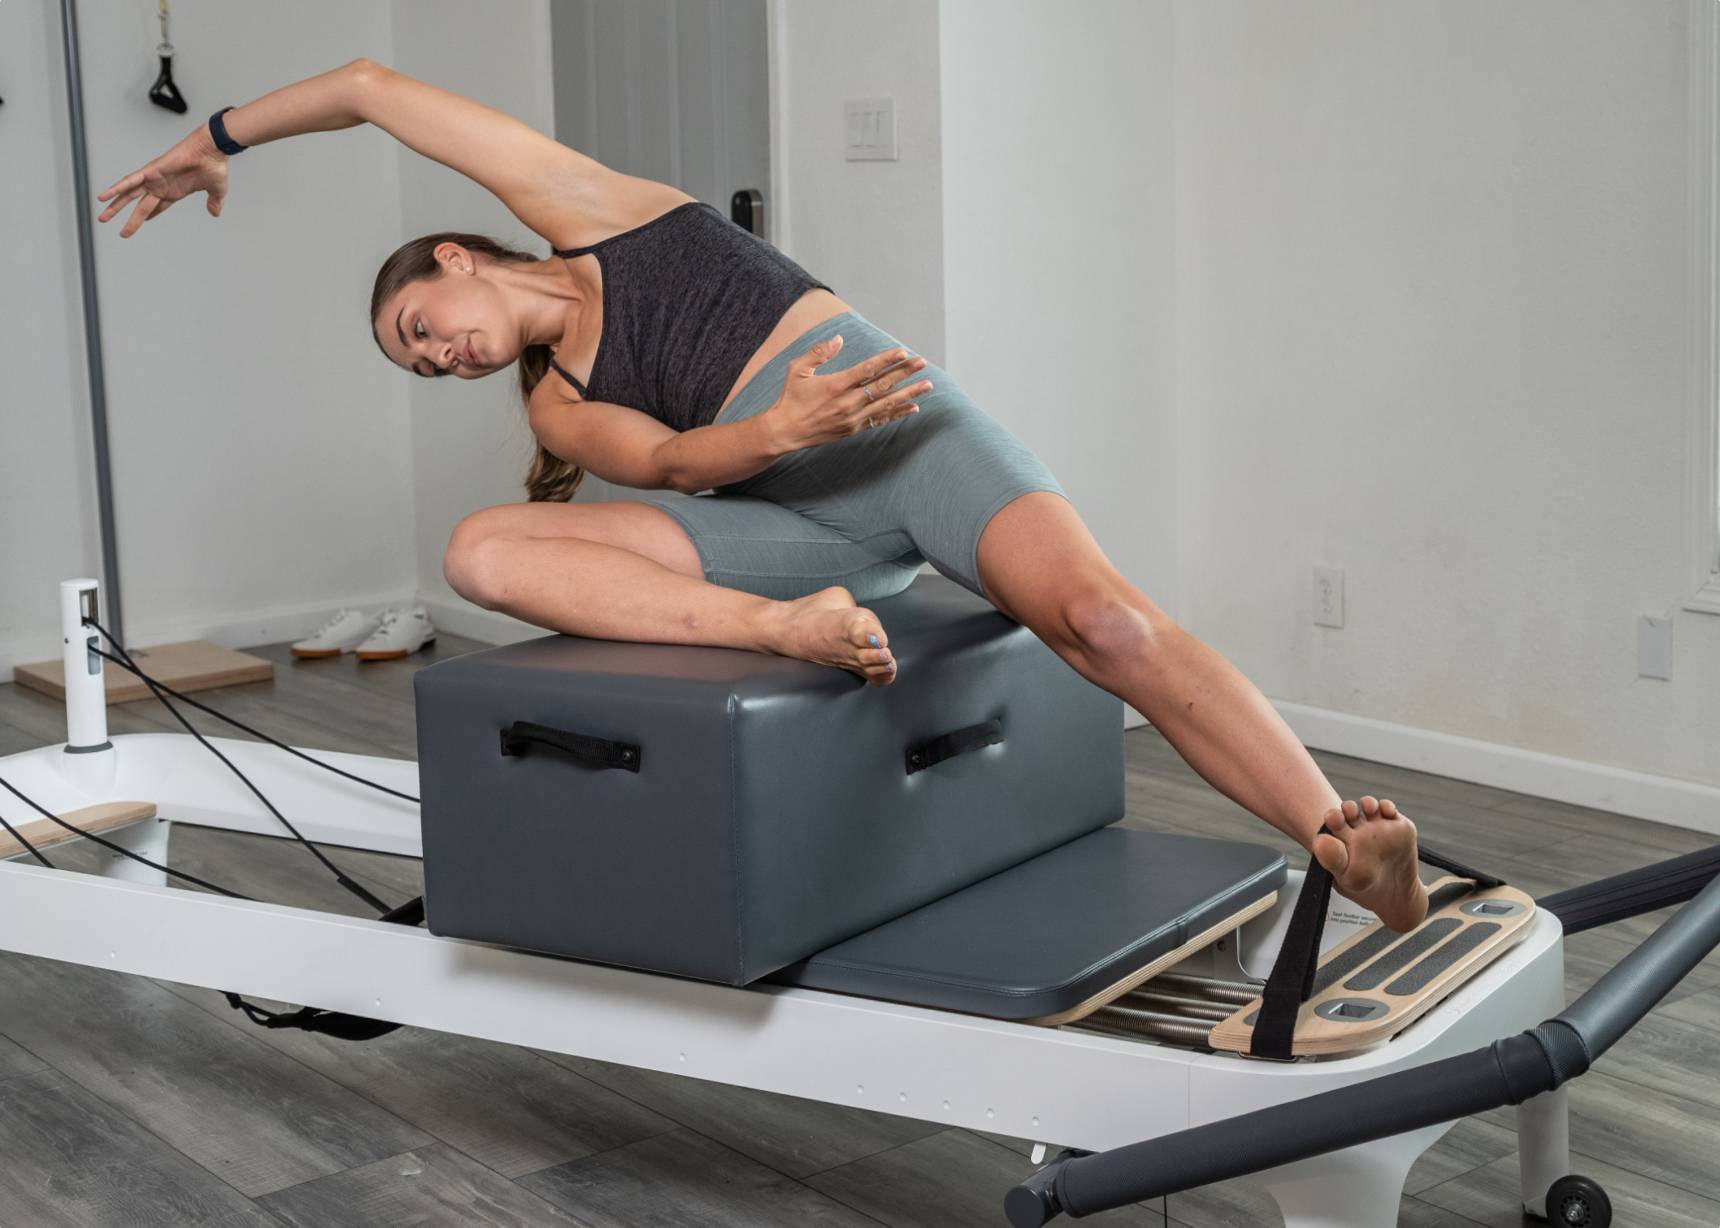 NEW MODEL SHOWS IMPORTANCE OF FEET, TOES IN BODY BALANCE — Pilates